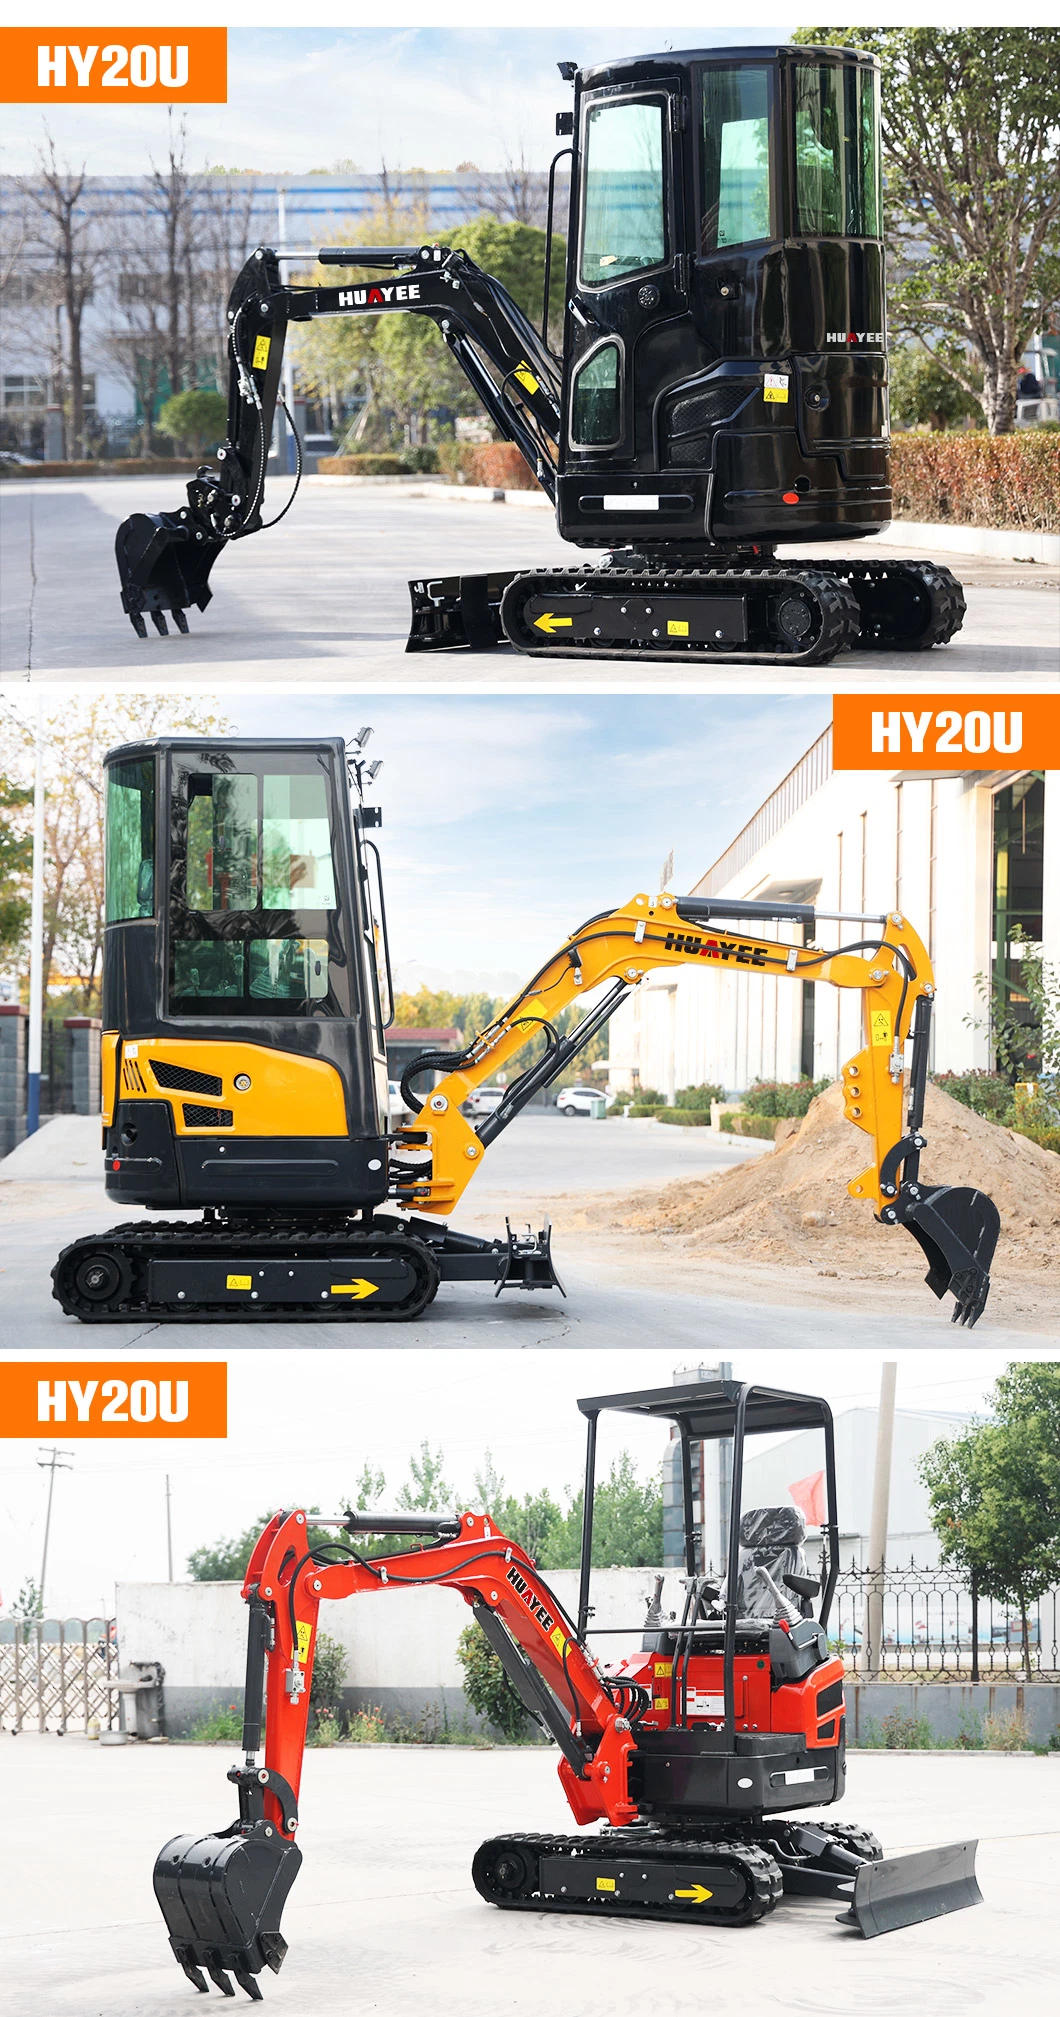 Huyee Factory Crawler Euro 5 EPA 4 Engine 2.5ton Small Digger 2ton 3.5 Ton Hydraulic Construction 3500kg Diggers 5 Ton Mini Excavator for Sale Prices with Thumb